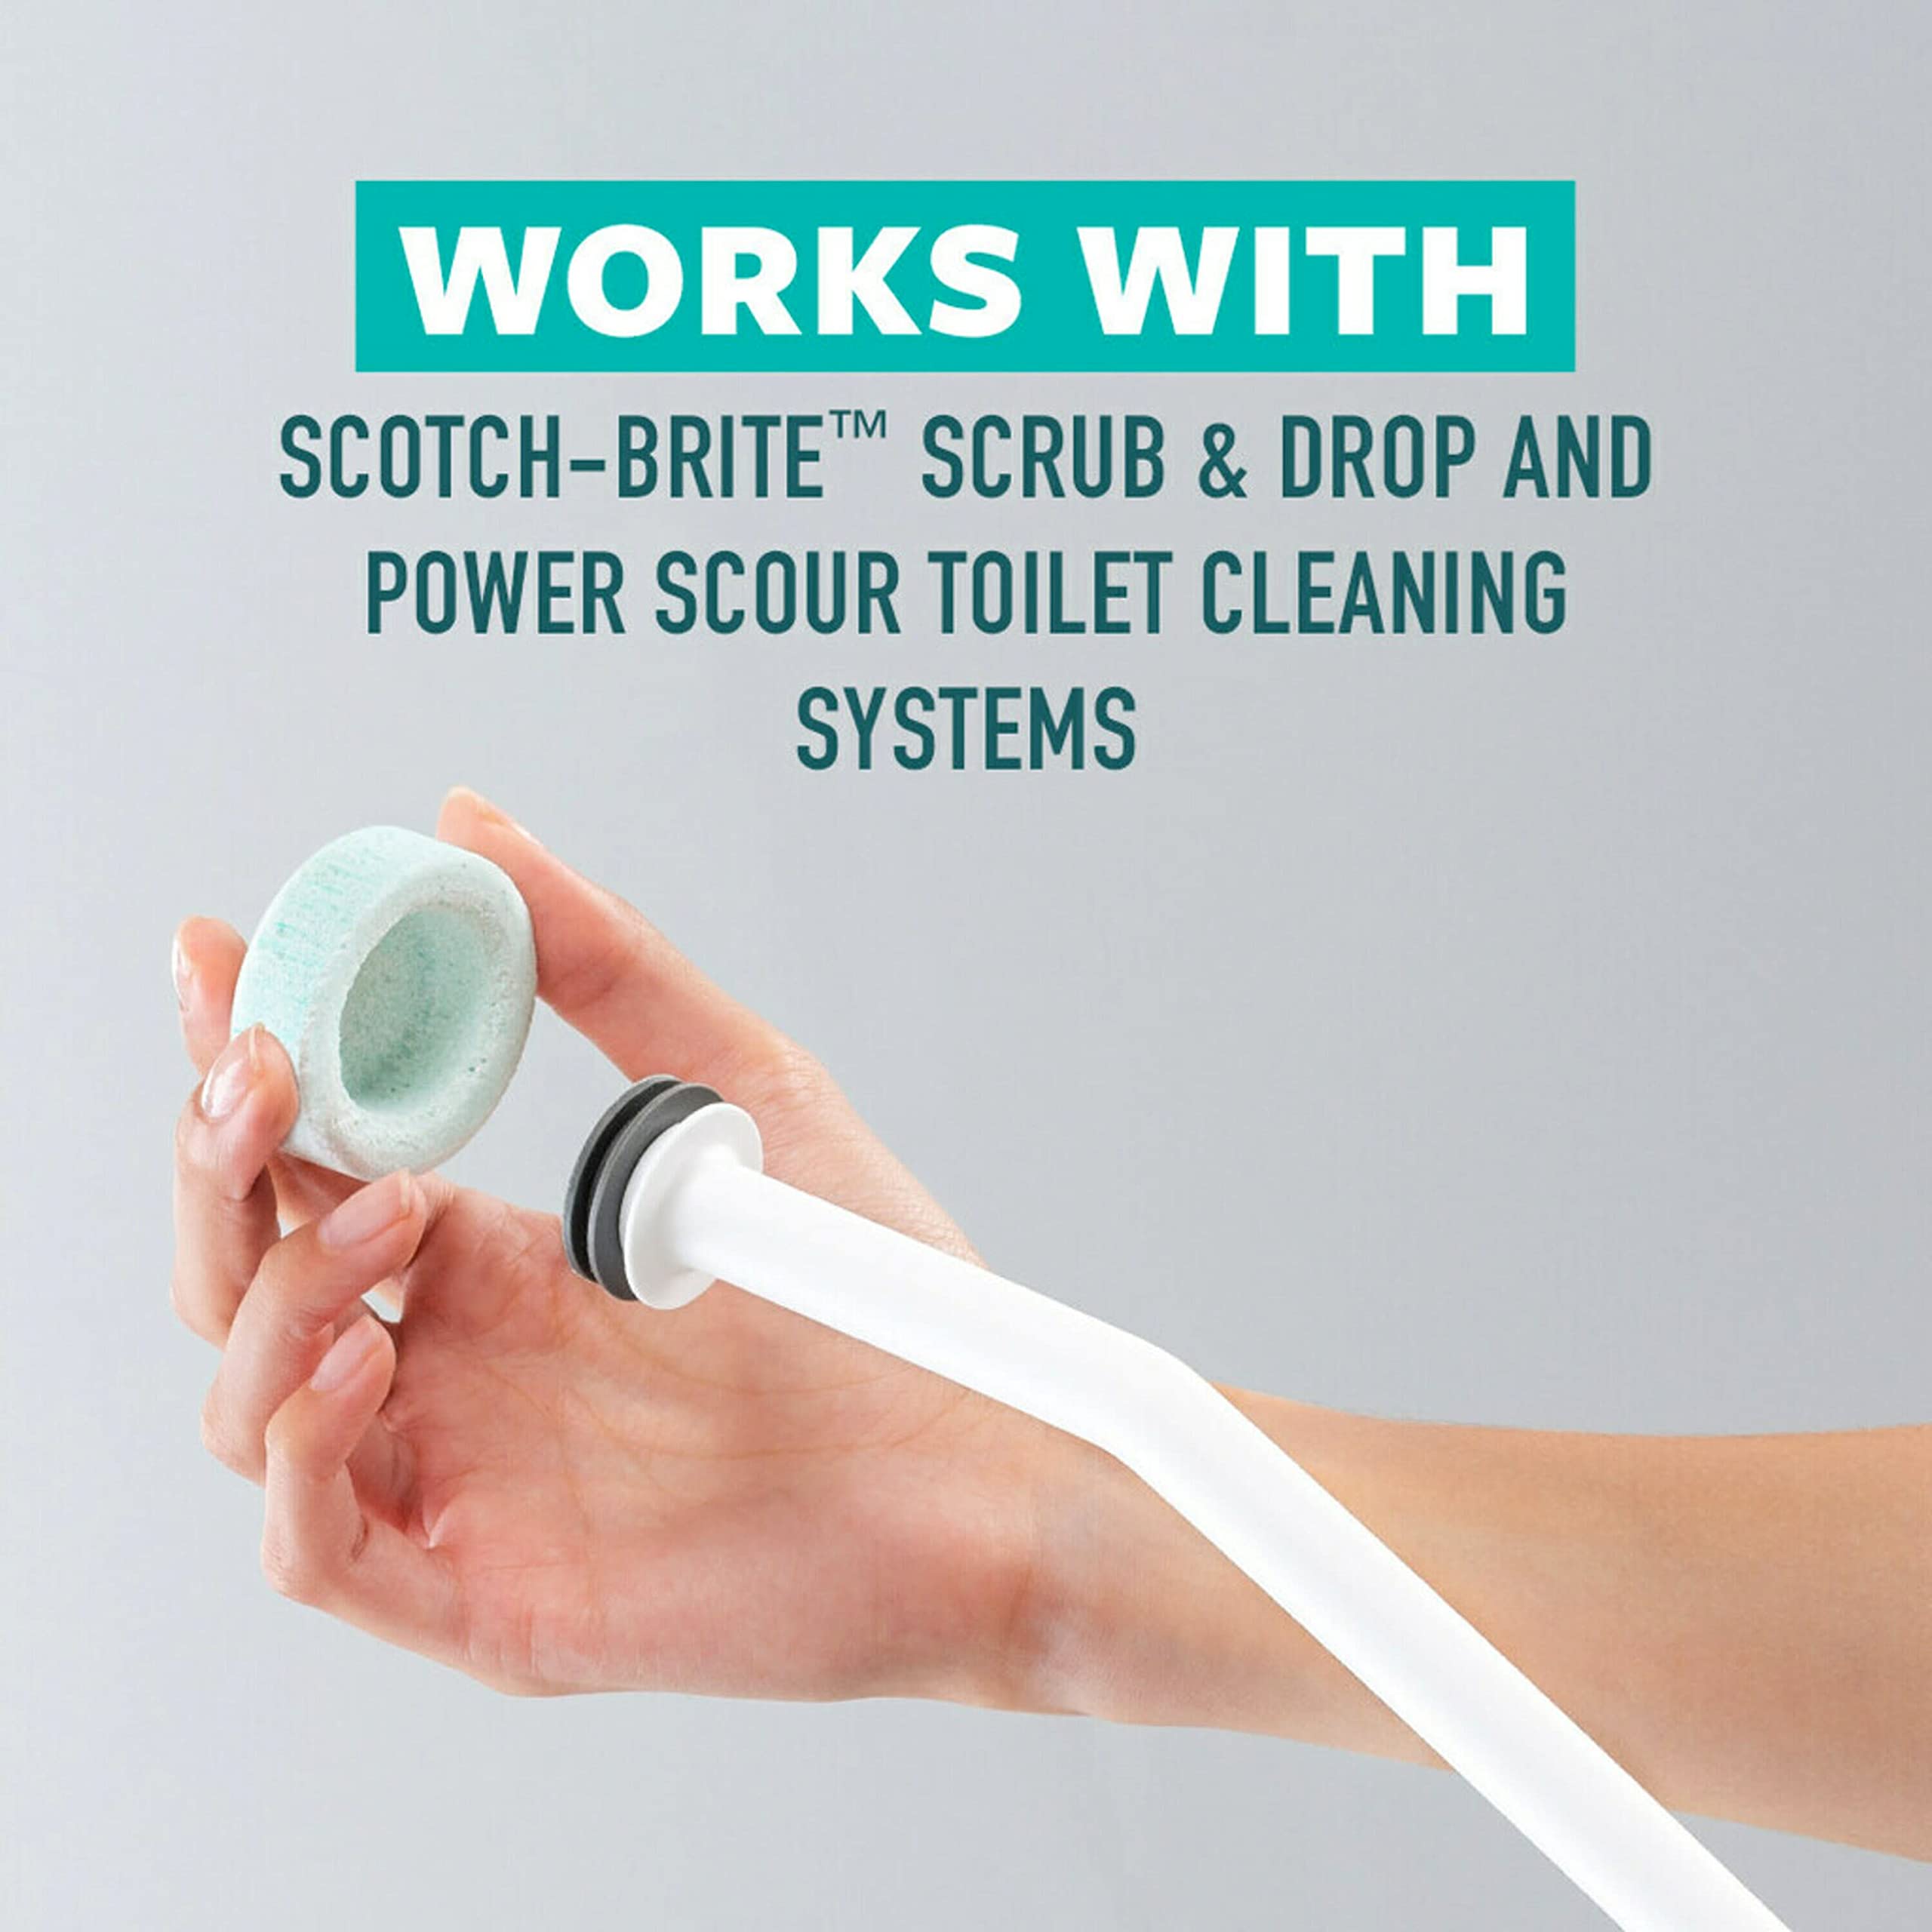 Scotch-Brite Scrub & Drop Toilet Cleaning System Refills, Dissolvable Toilet Bowl Cleaner Scrub Pad Tablets, 6 Disposable Refills